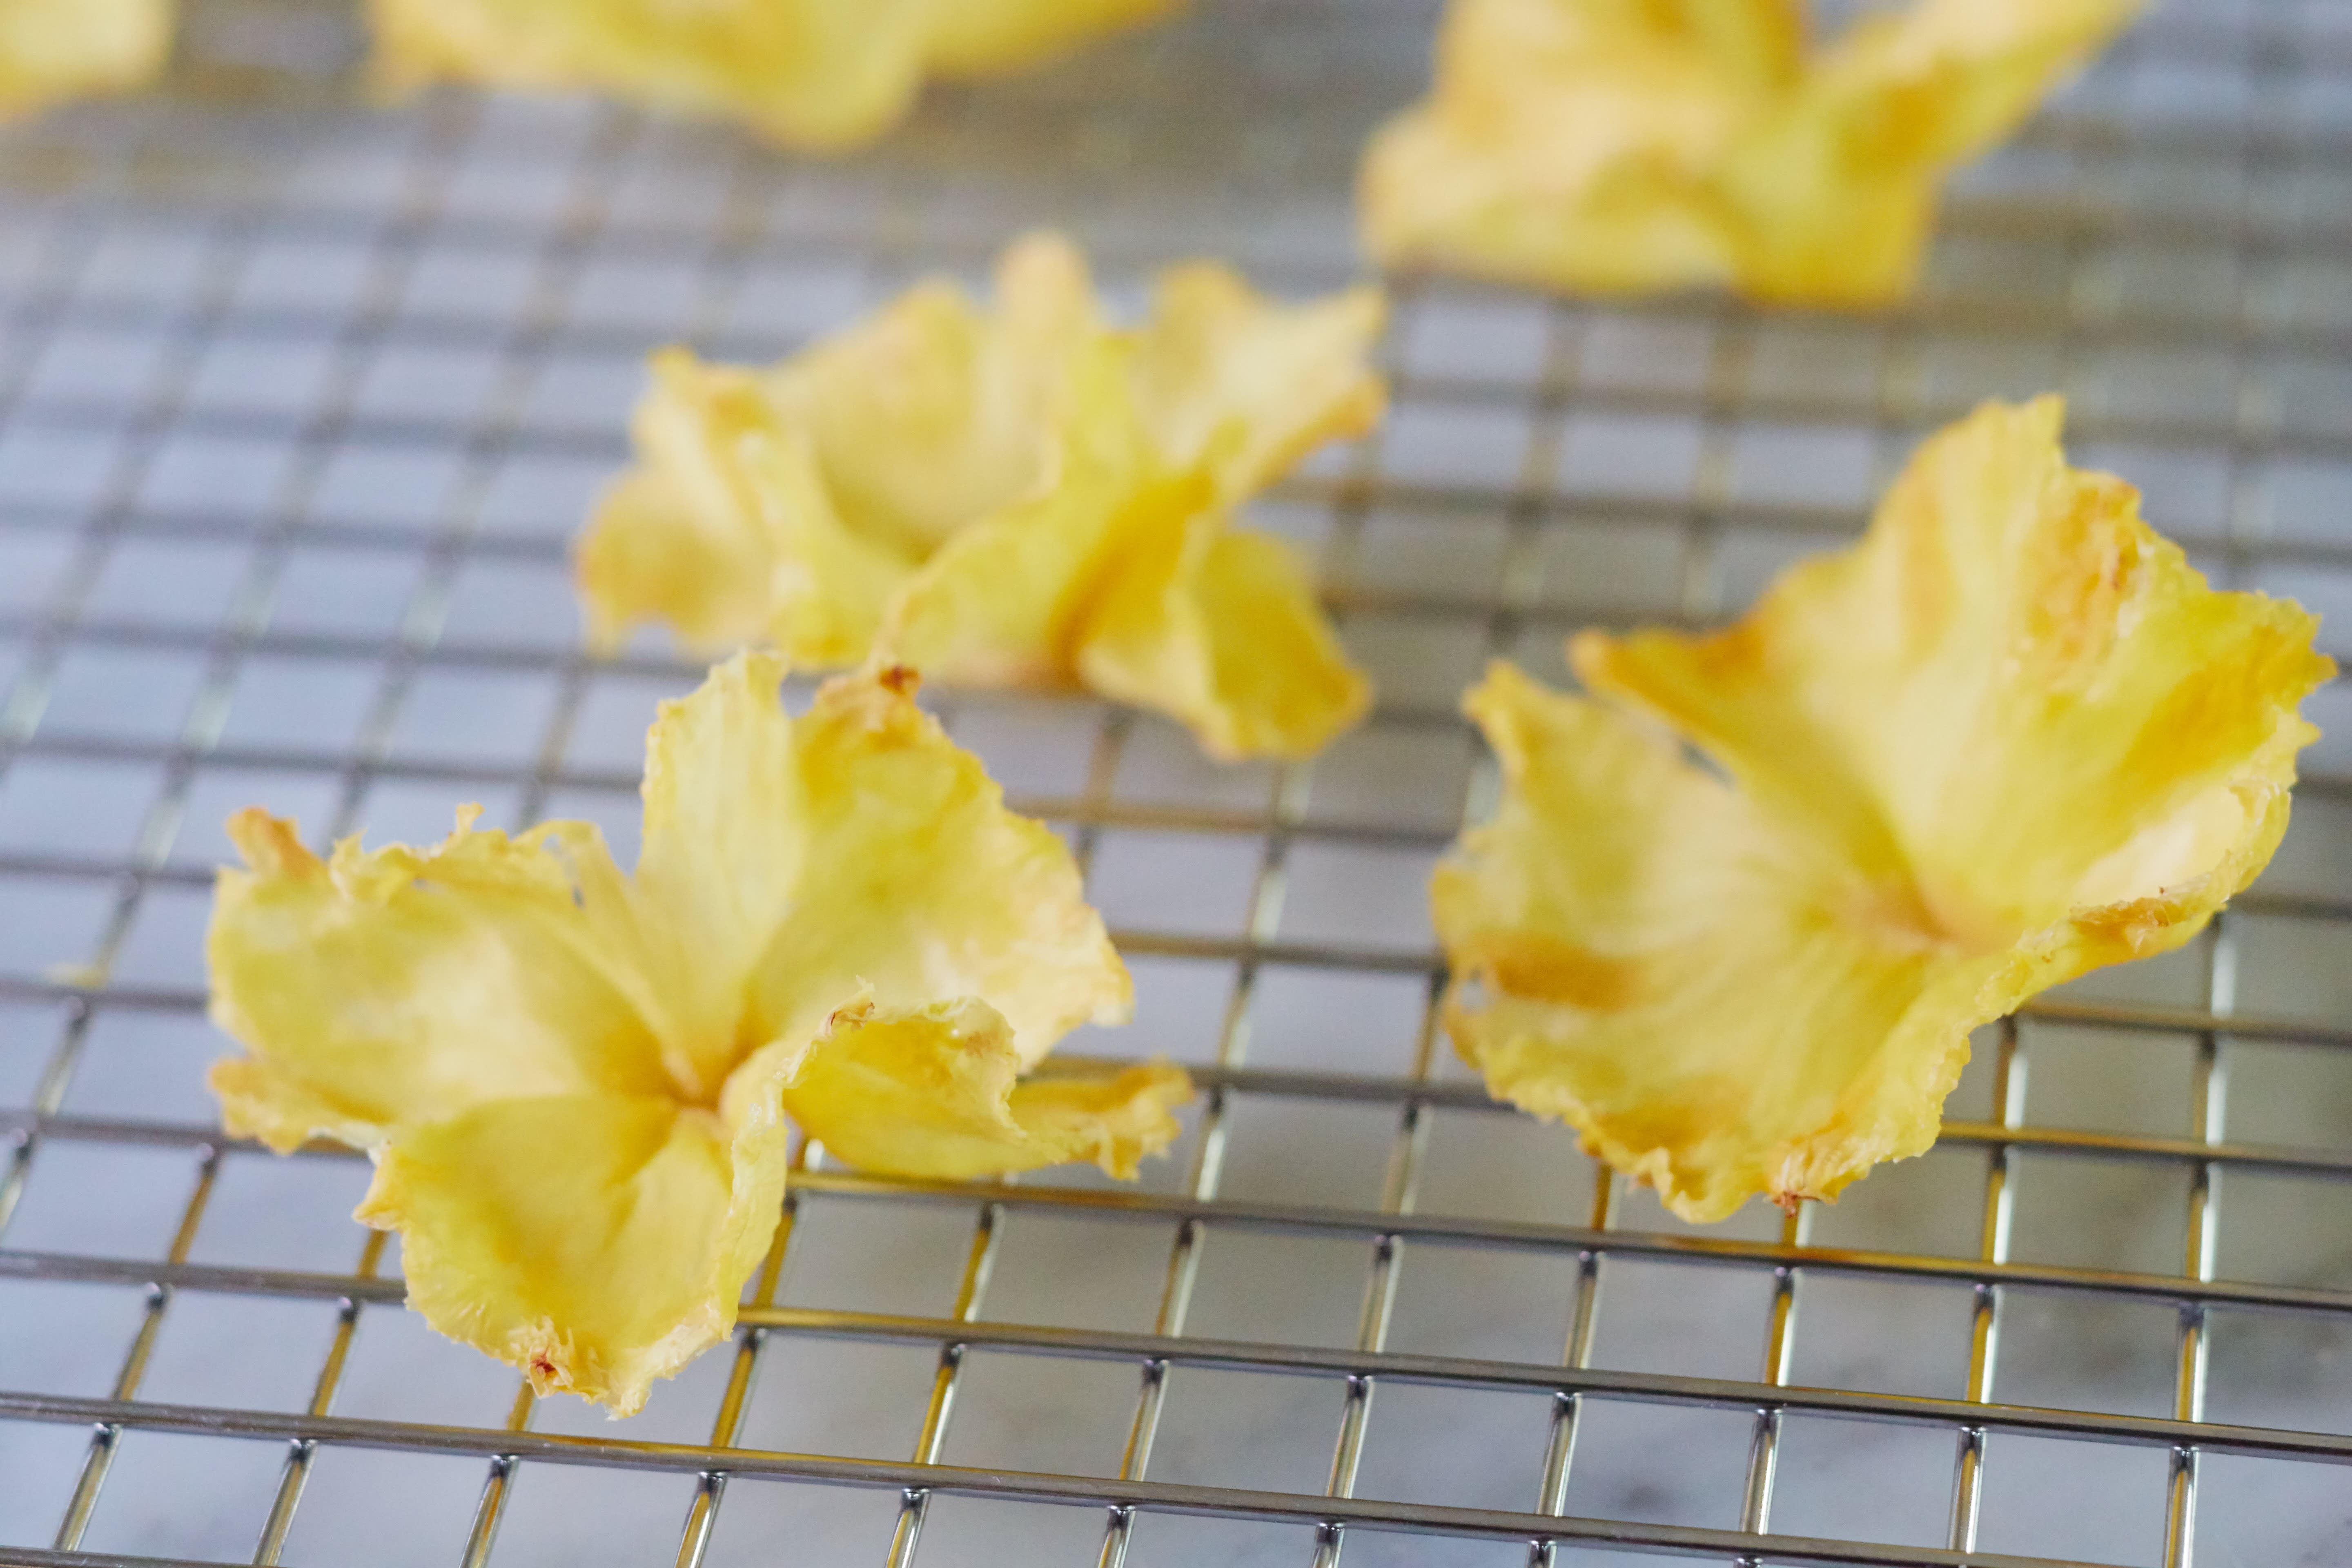 How to Make a Dried Pineapple Flower Garnish for Cupcakes or Cakes